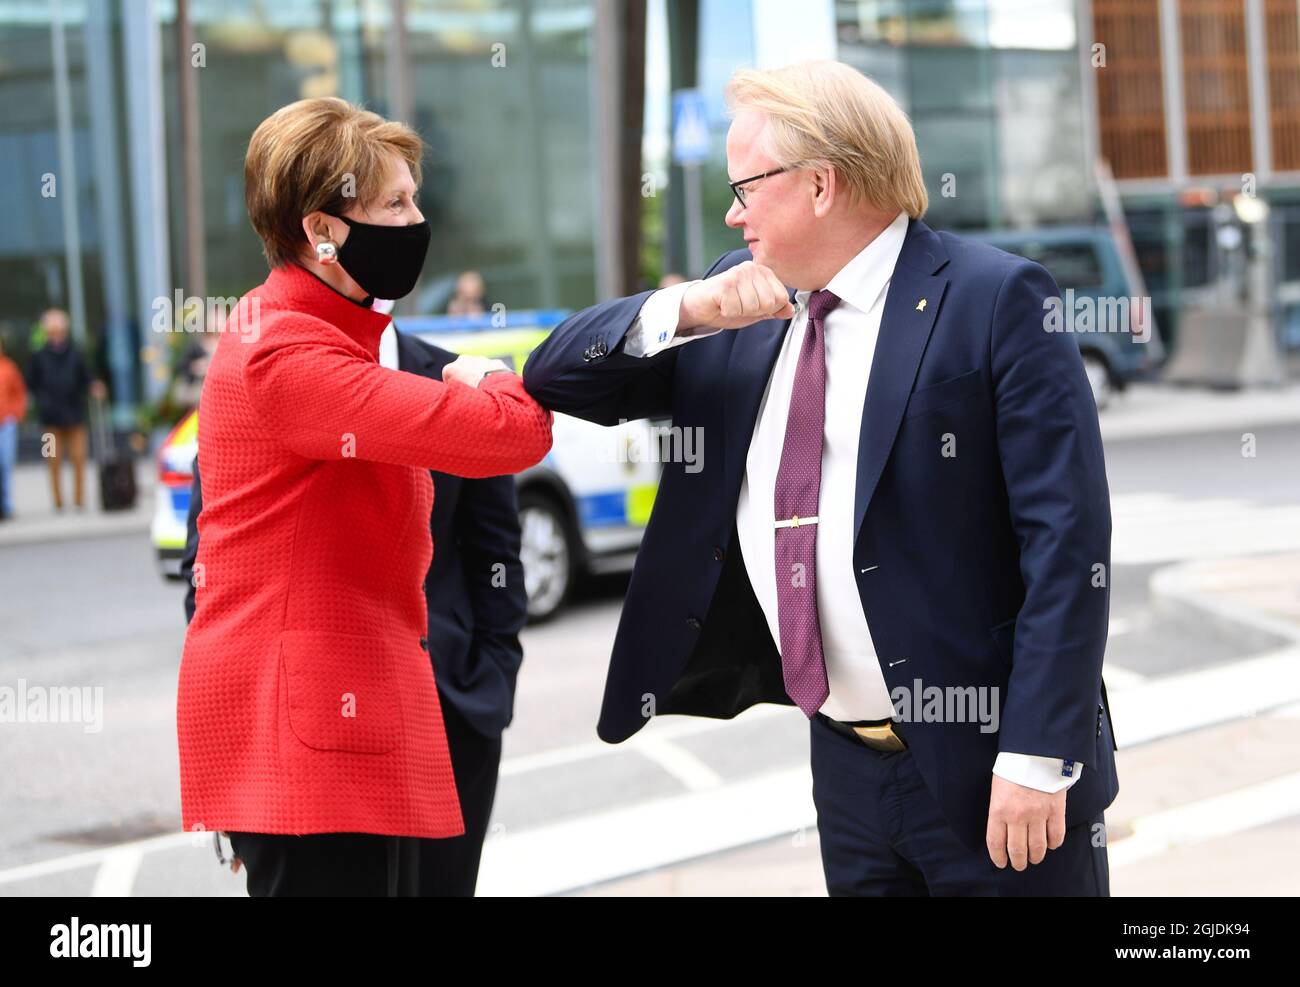 Sweden's Minister for Defence Peter Hultqvist (R) receives United States secretary of the Air Force Barbara M. Barrett (L) at the Arlanda Airport outside Stockholm Friday 28 Aug. During the meeting, the ministers will, among other things, discuss regional security in the immediate area, bilateral cooperation Arctic issues. Foto: Fredrik Sandberg / TT kod 10080  Stock Photo